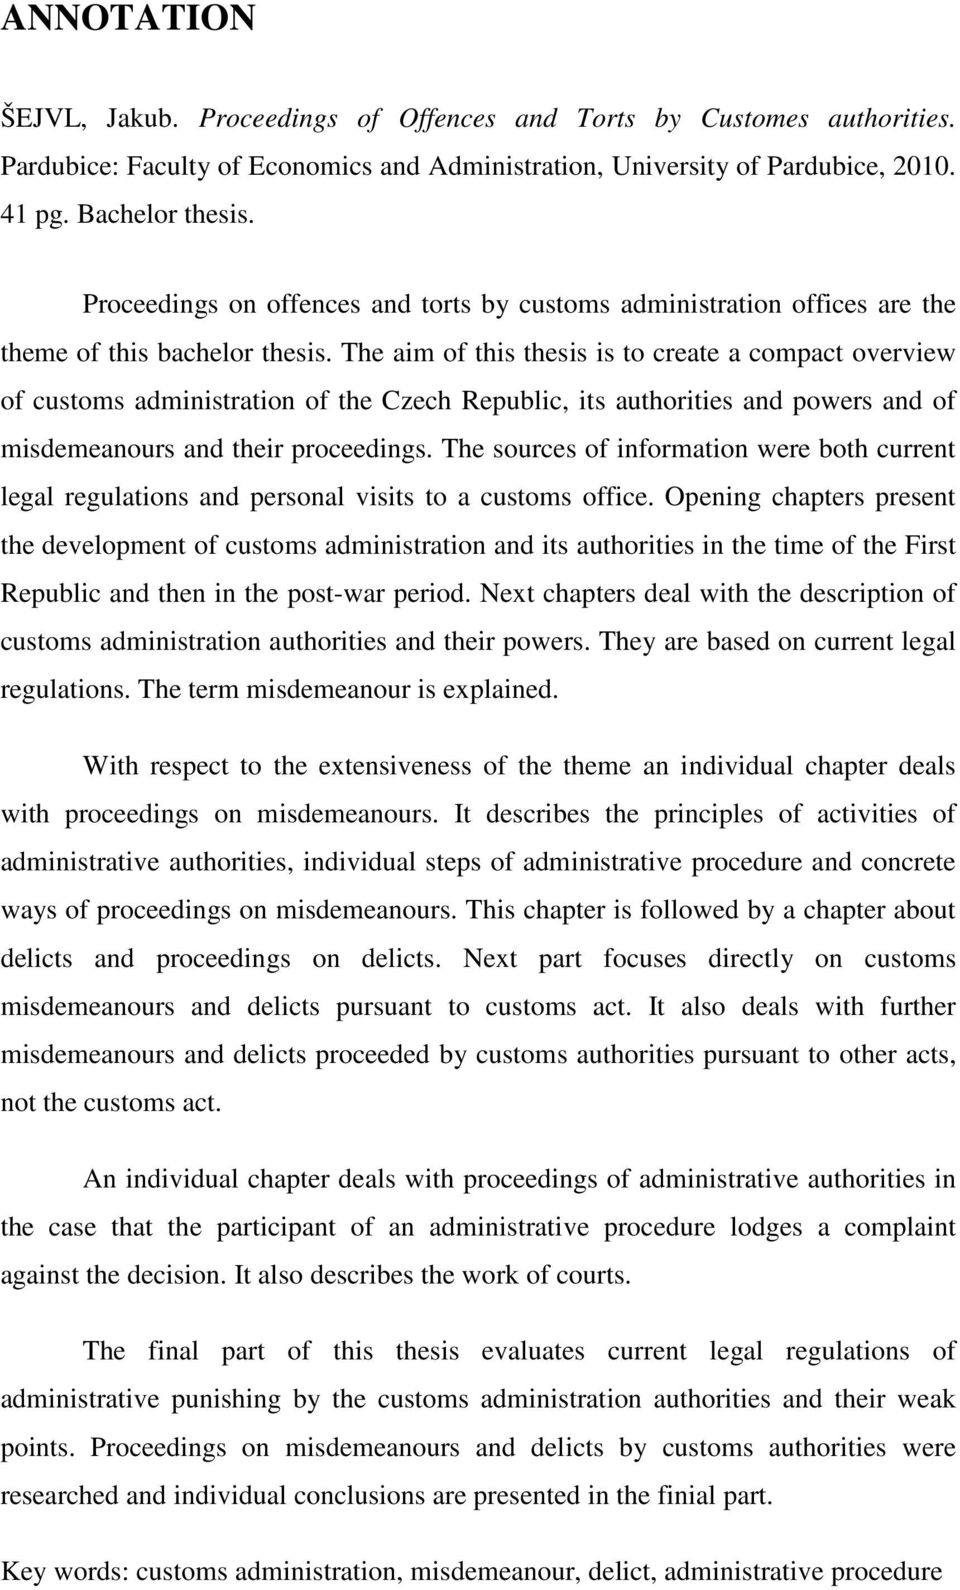 The aim of this thesis is to create a compact overview of customs administration of the Czech Republic, its authorities and powers and of misdemeanours and their proceedings.